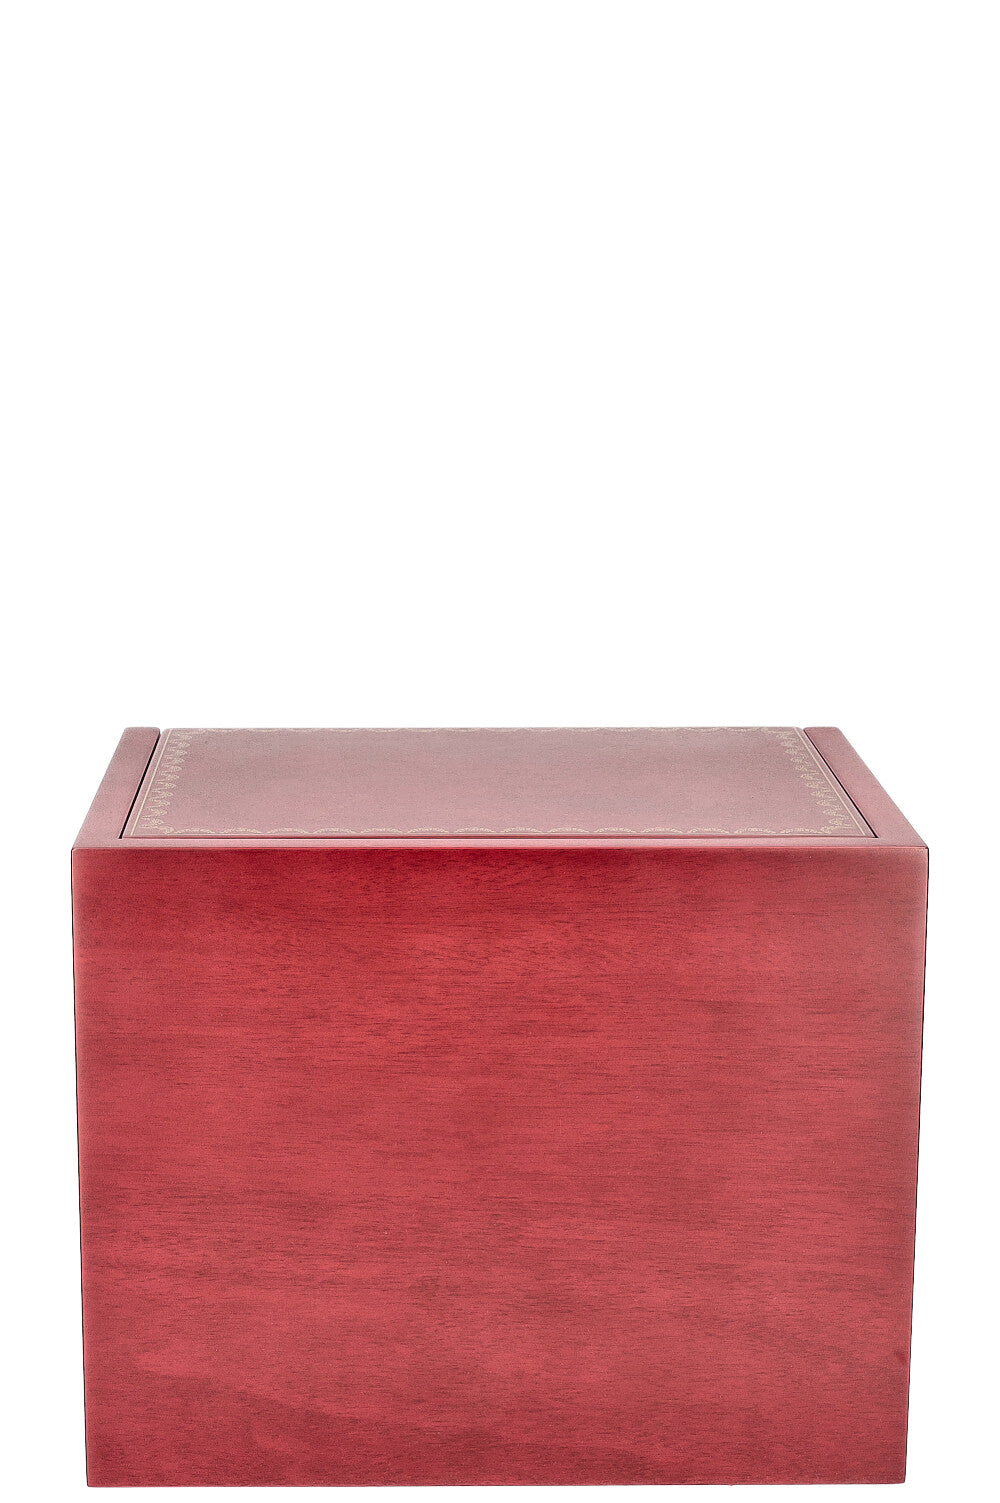 CARTIER Jewelry Box Wood Red